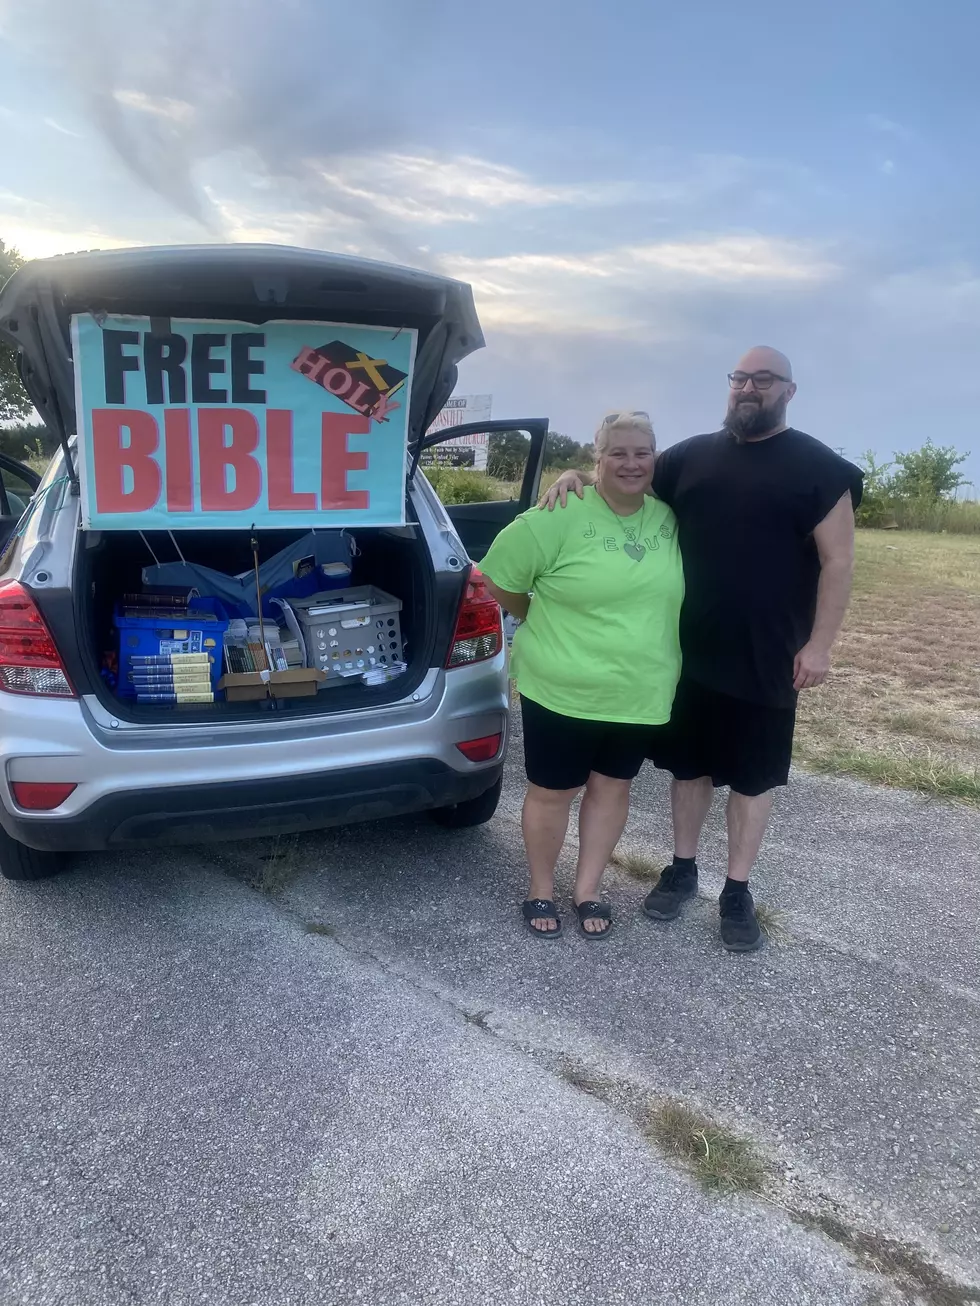 Killeen, Texas Couple Are On A Mission To Spread The Word of God